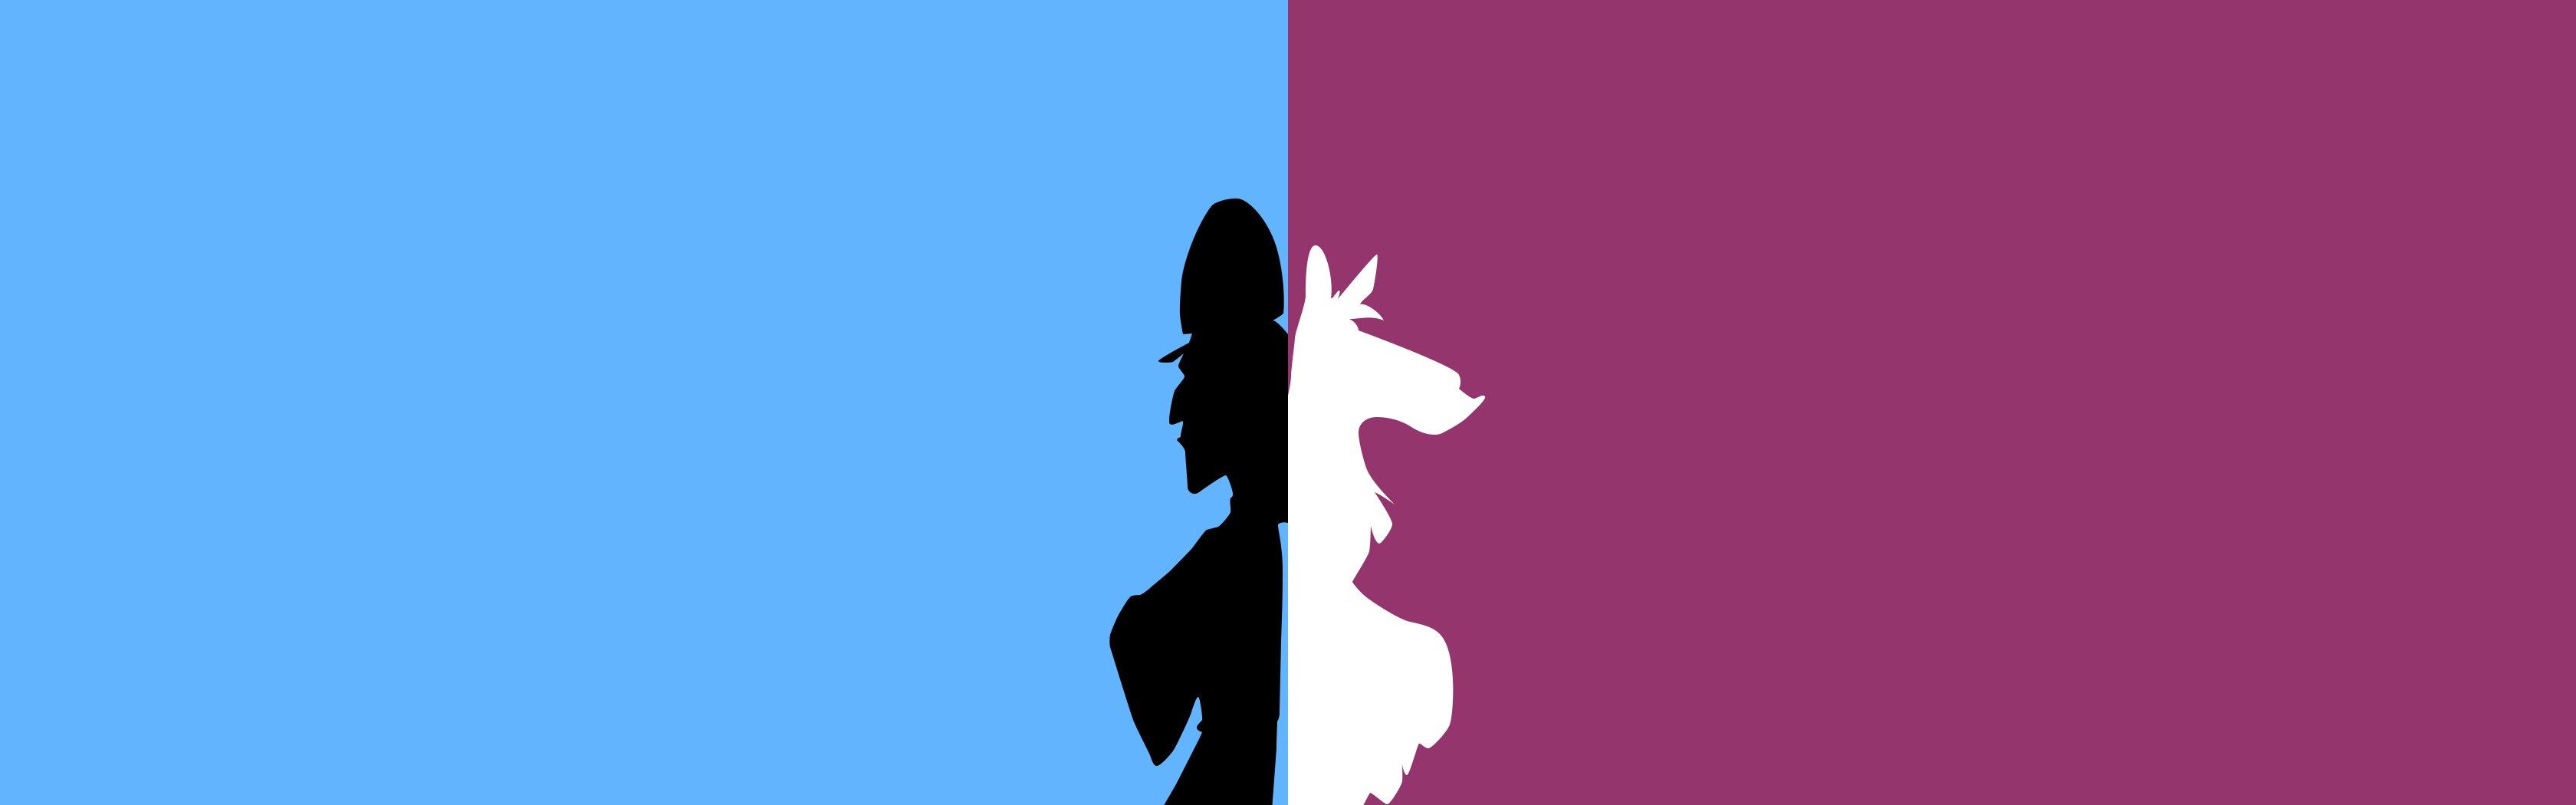 Any Emperor's New Groove Fans Out there? : wallpapers.